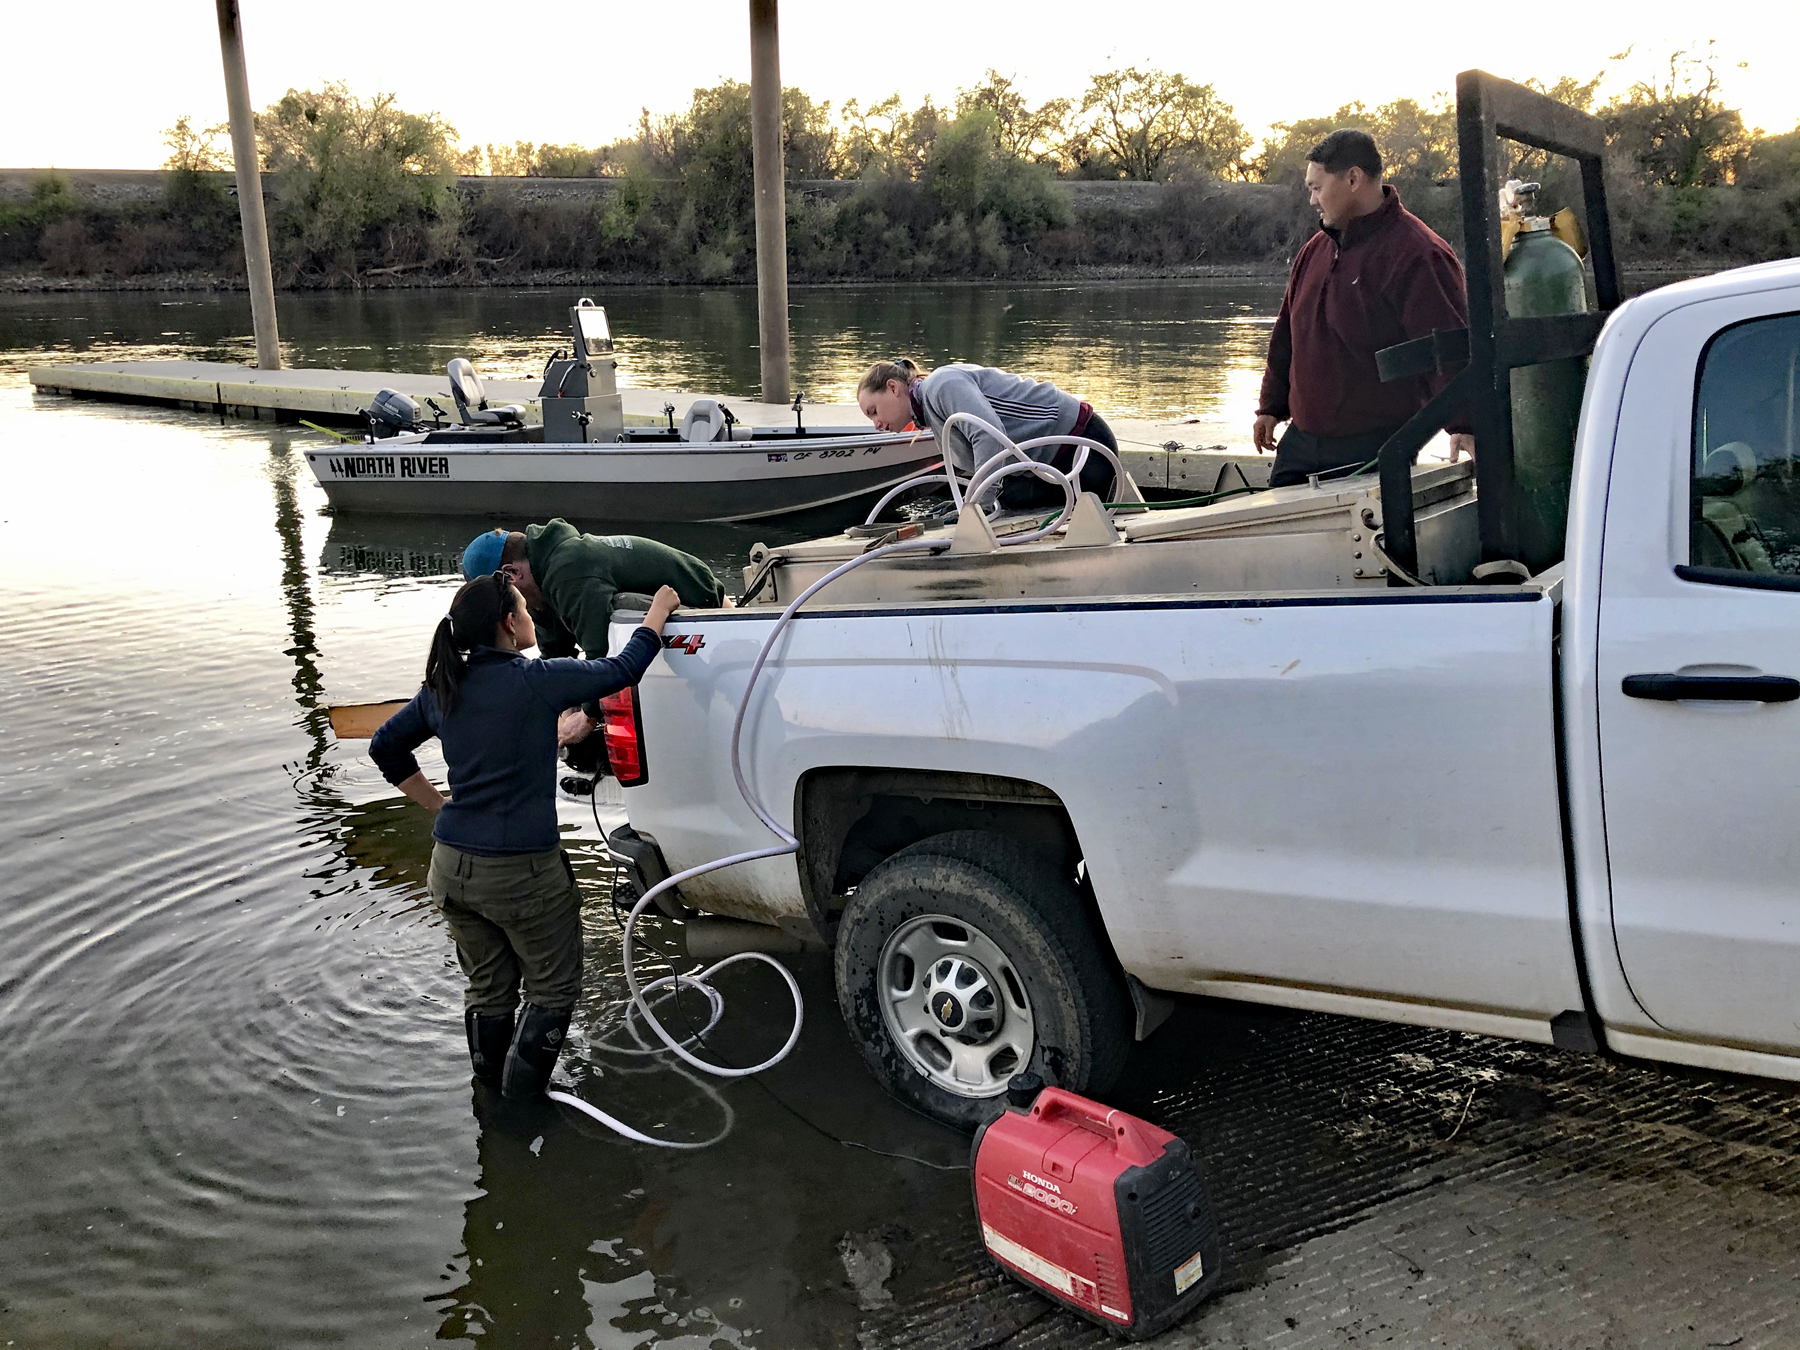 The UC Davis team pick-up truck backed-up to the Sacramento River and being prepared to release the rice field-reared salmon into the Sacramento River.